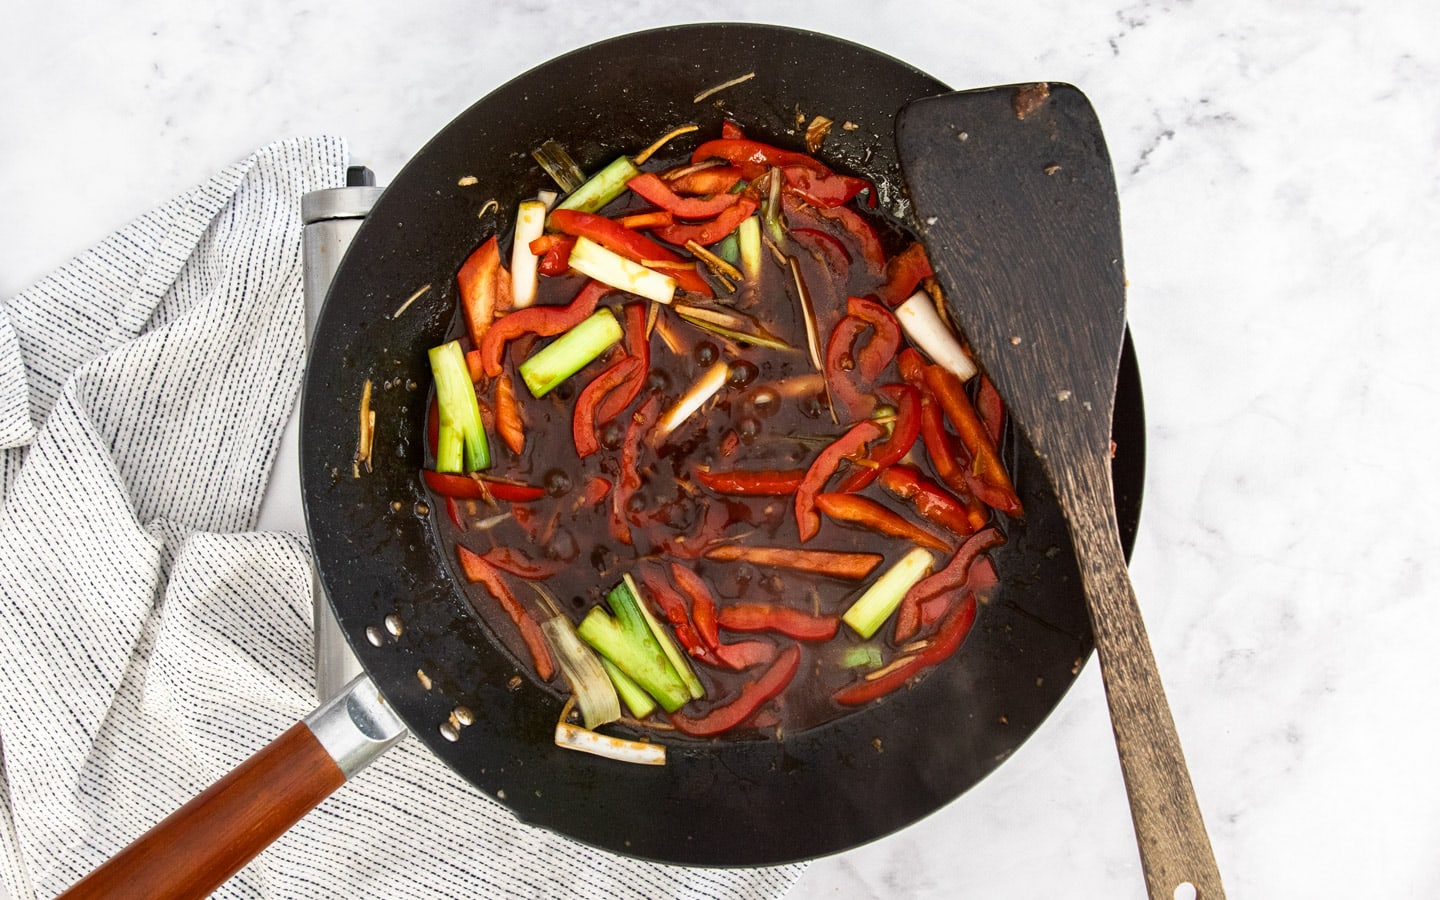 The sauce added to the vegetables in the wok.